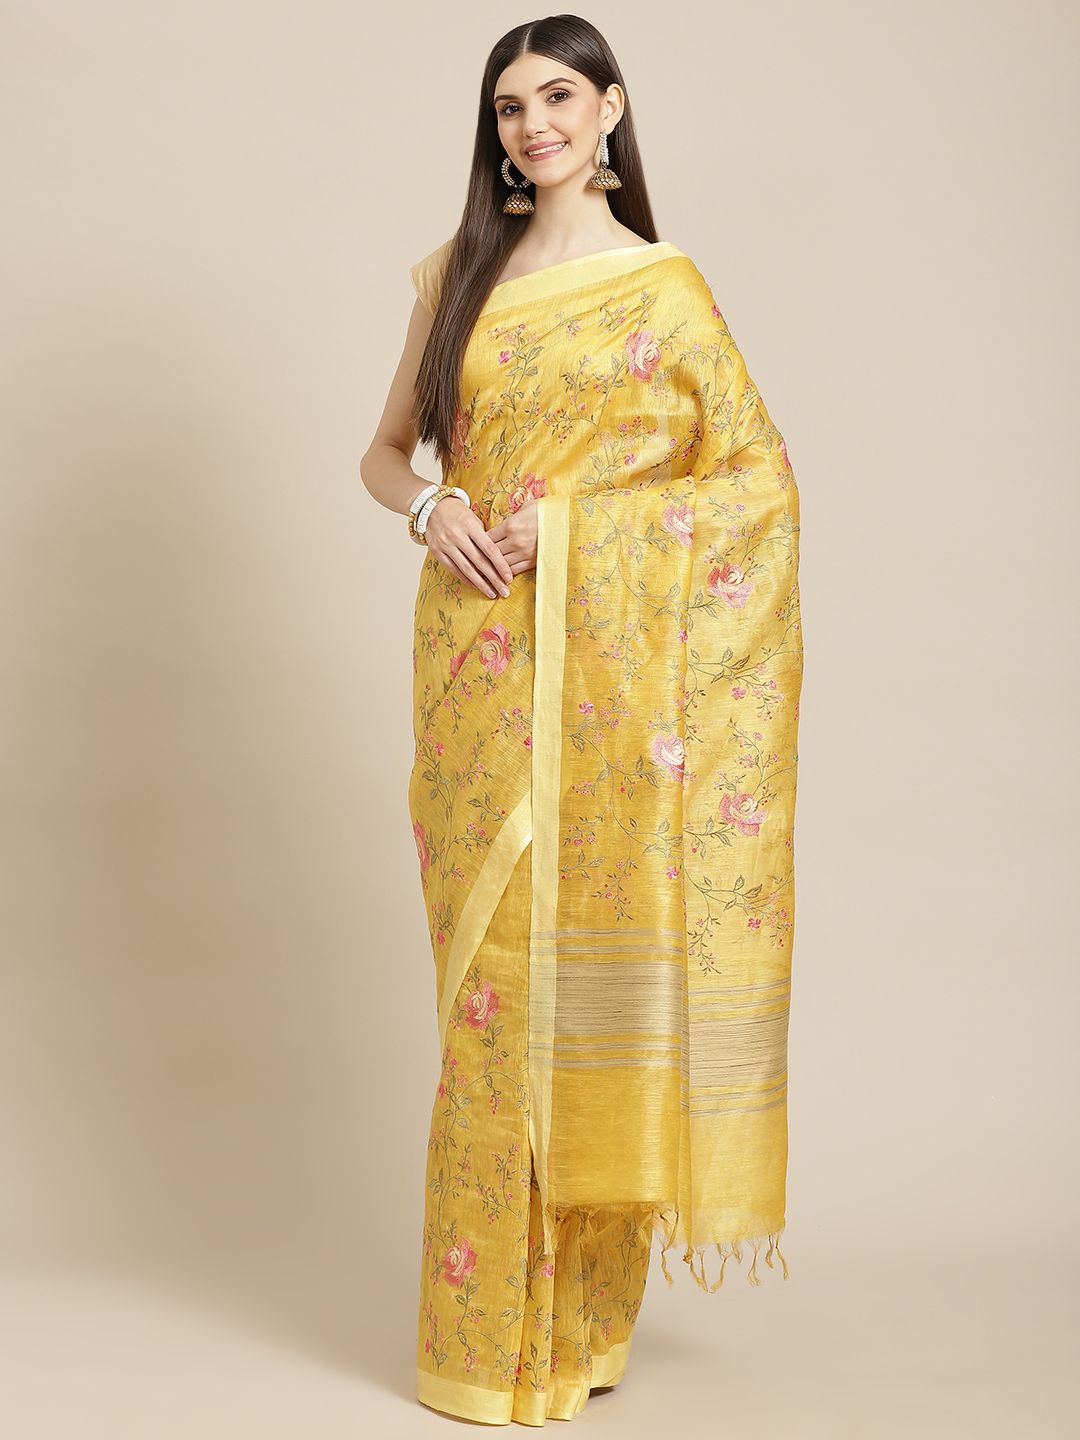 Meena Bazaar Mustard Yellow & Pink Floral Woven Design Saree with Blouse Price in India